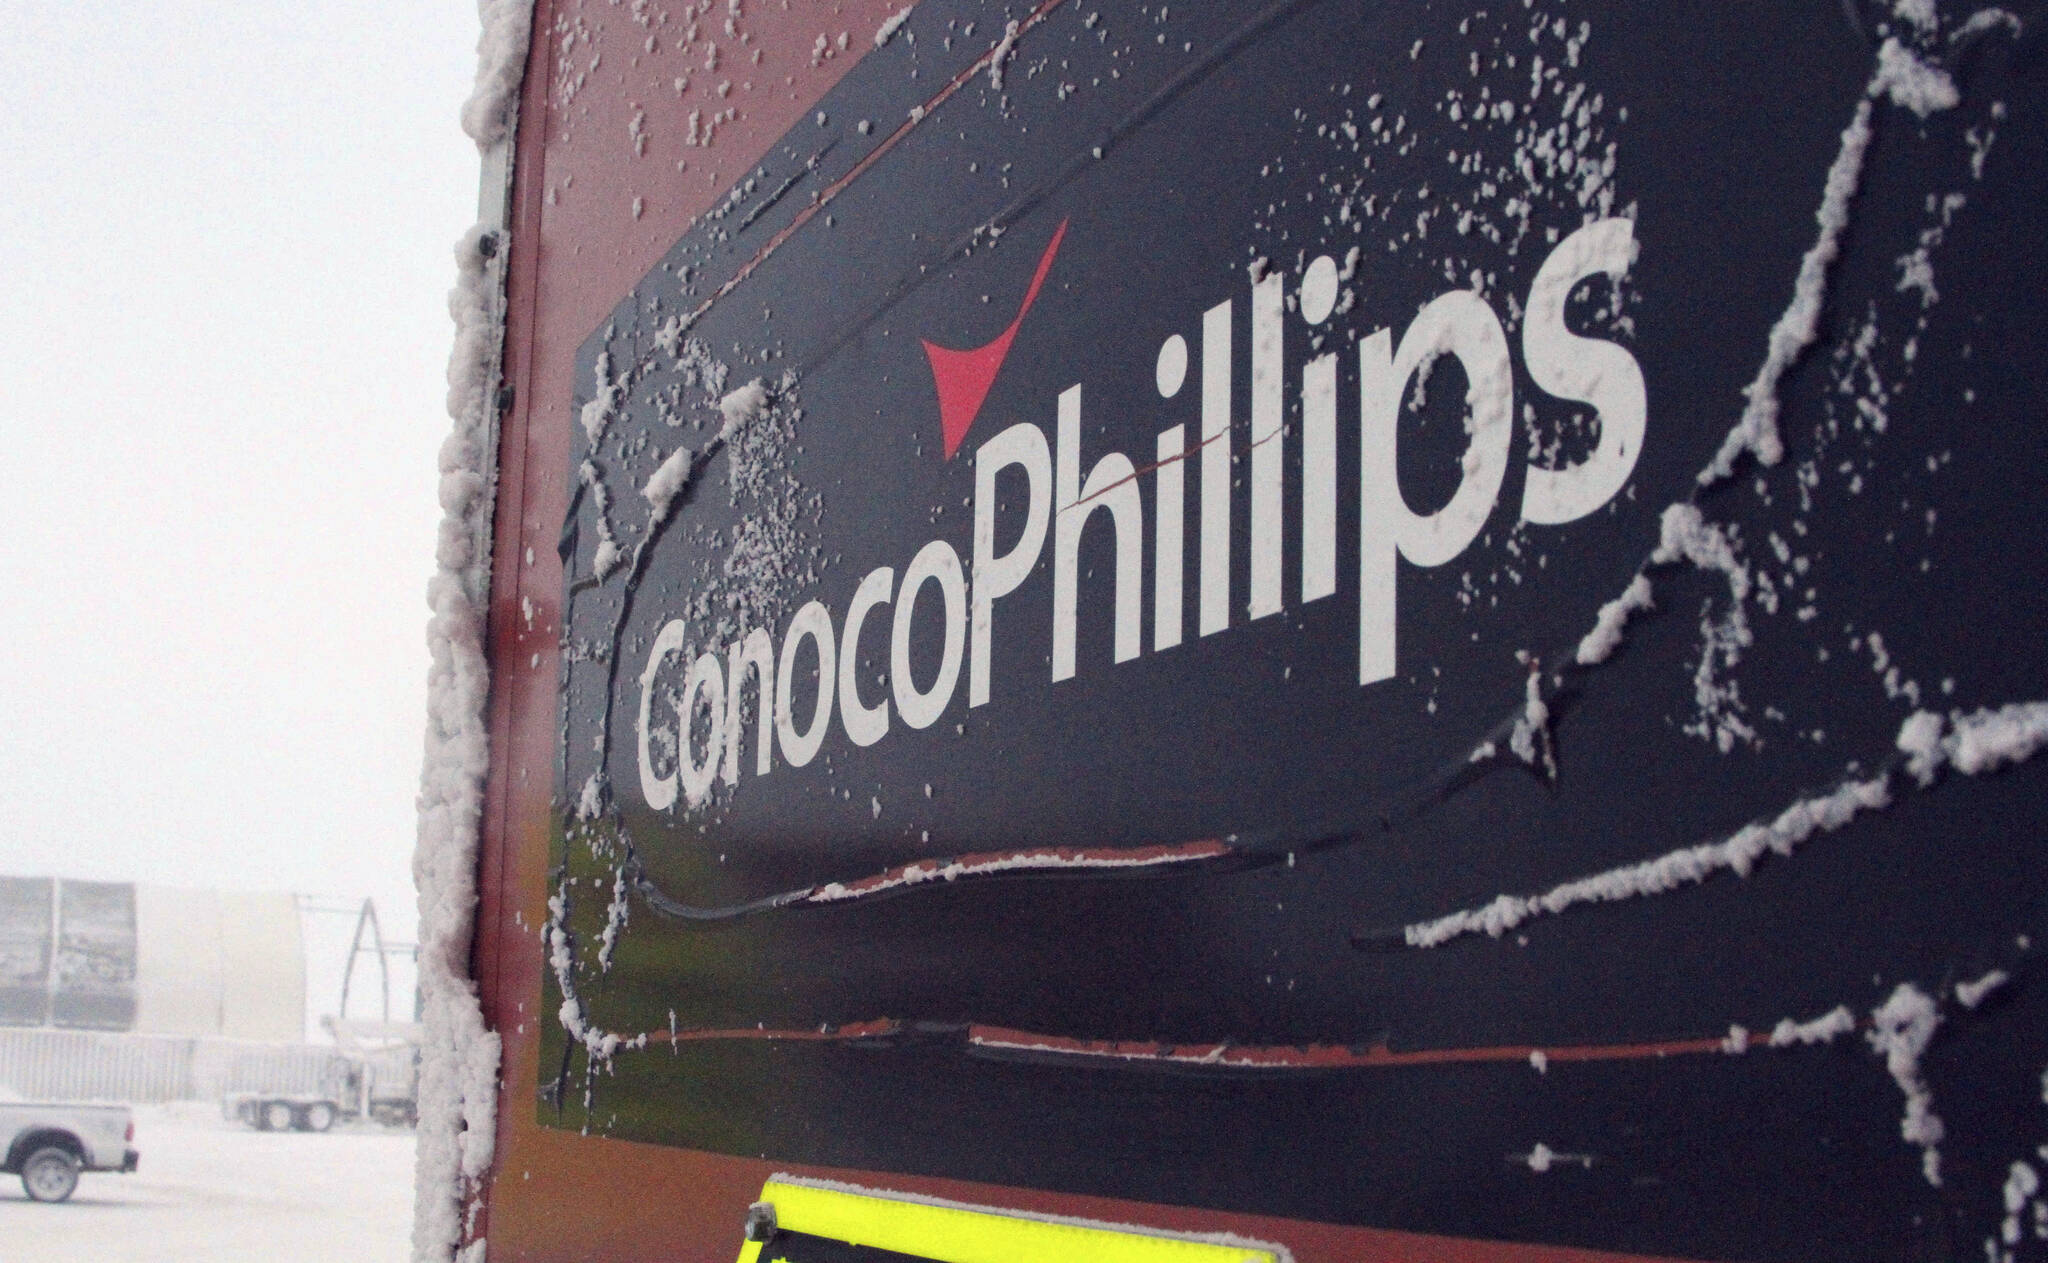 A ConocoPhillips sign covered in ice at the Colville-Delta 5, or as it's more commonly known, CD5, is seen at a drilling site on Alaska's North Slope on Feb. 9, 2016. ConocoPhillips has detailed reasons and remedies following a natural gas leak last year on the North Slope that caused 300 employees to be evacuated. Company officials spoke Thursday, March 23, 2023, during an Alaska Oil and Gas Conservation Commission hearing into the leak at its Alpine field. It said pumping 170 barrels of diesel fuel into a disposal well to prevent freezing caused a component to fail. The leak went unnoticed for days but was corrected. A company official says no one was harmed by the leak. (AP Photo / Mark Thiessen)